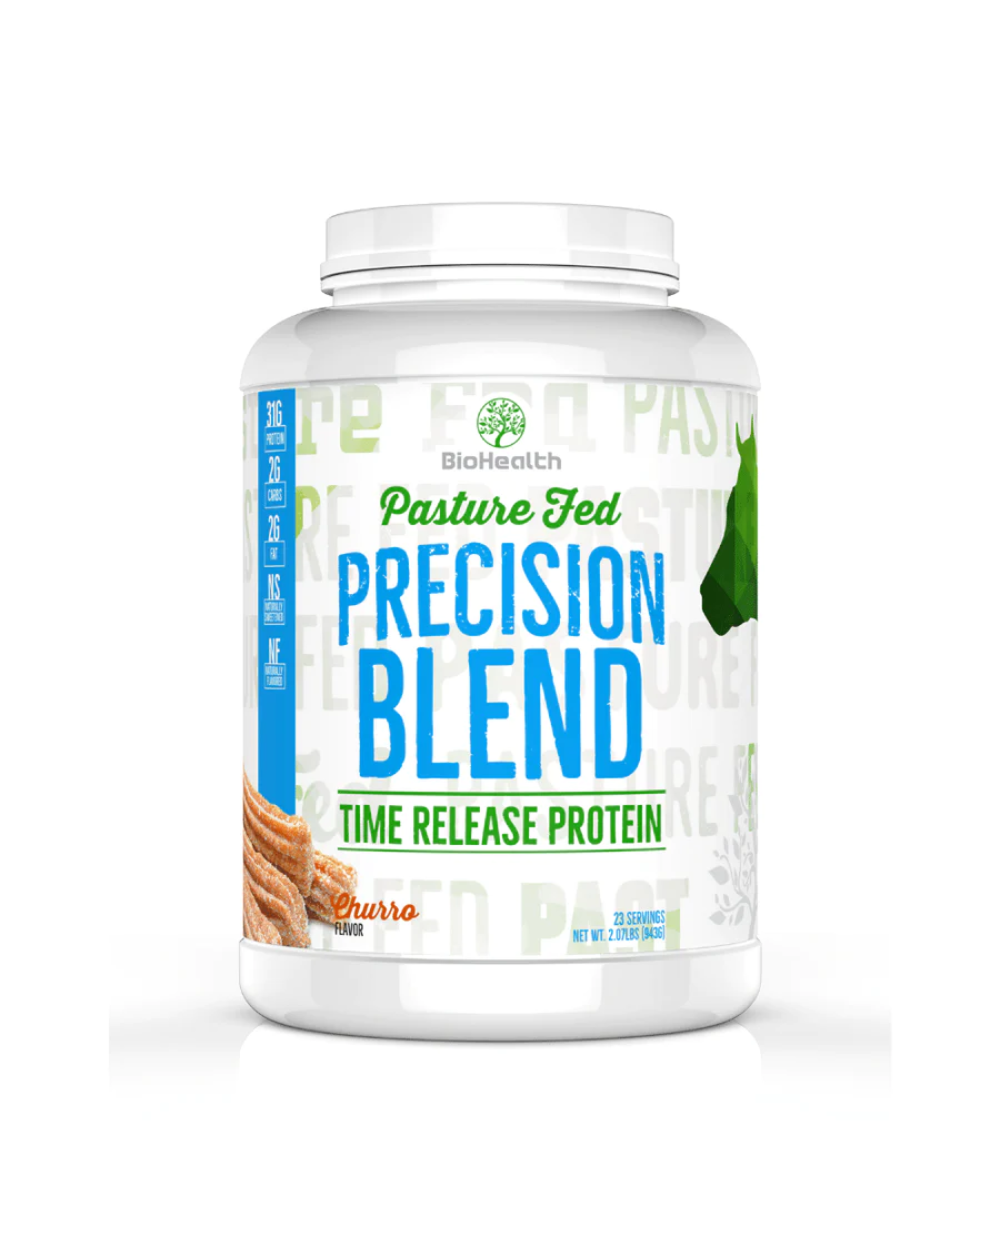 Precision Blend 2lb (Pasture Fed) - Call For In Store Pricing